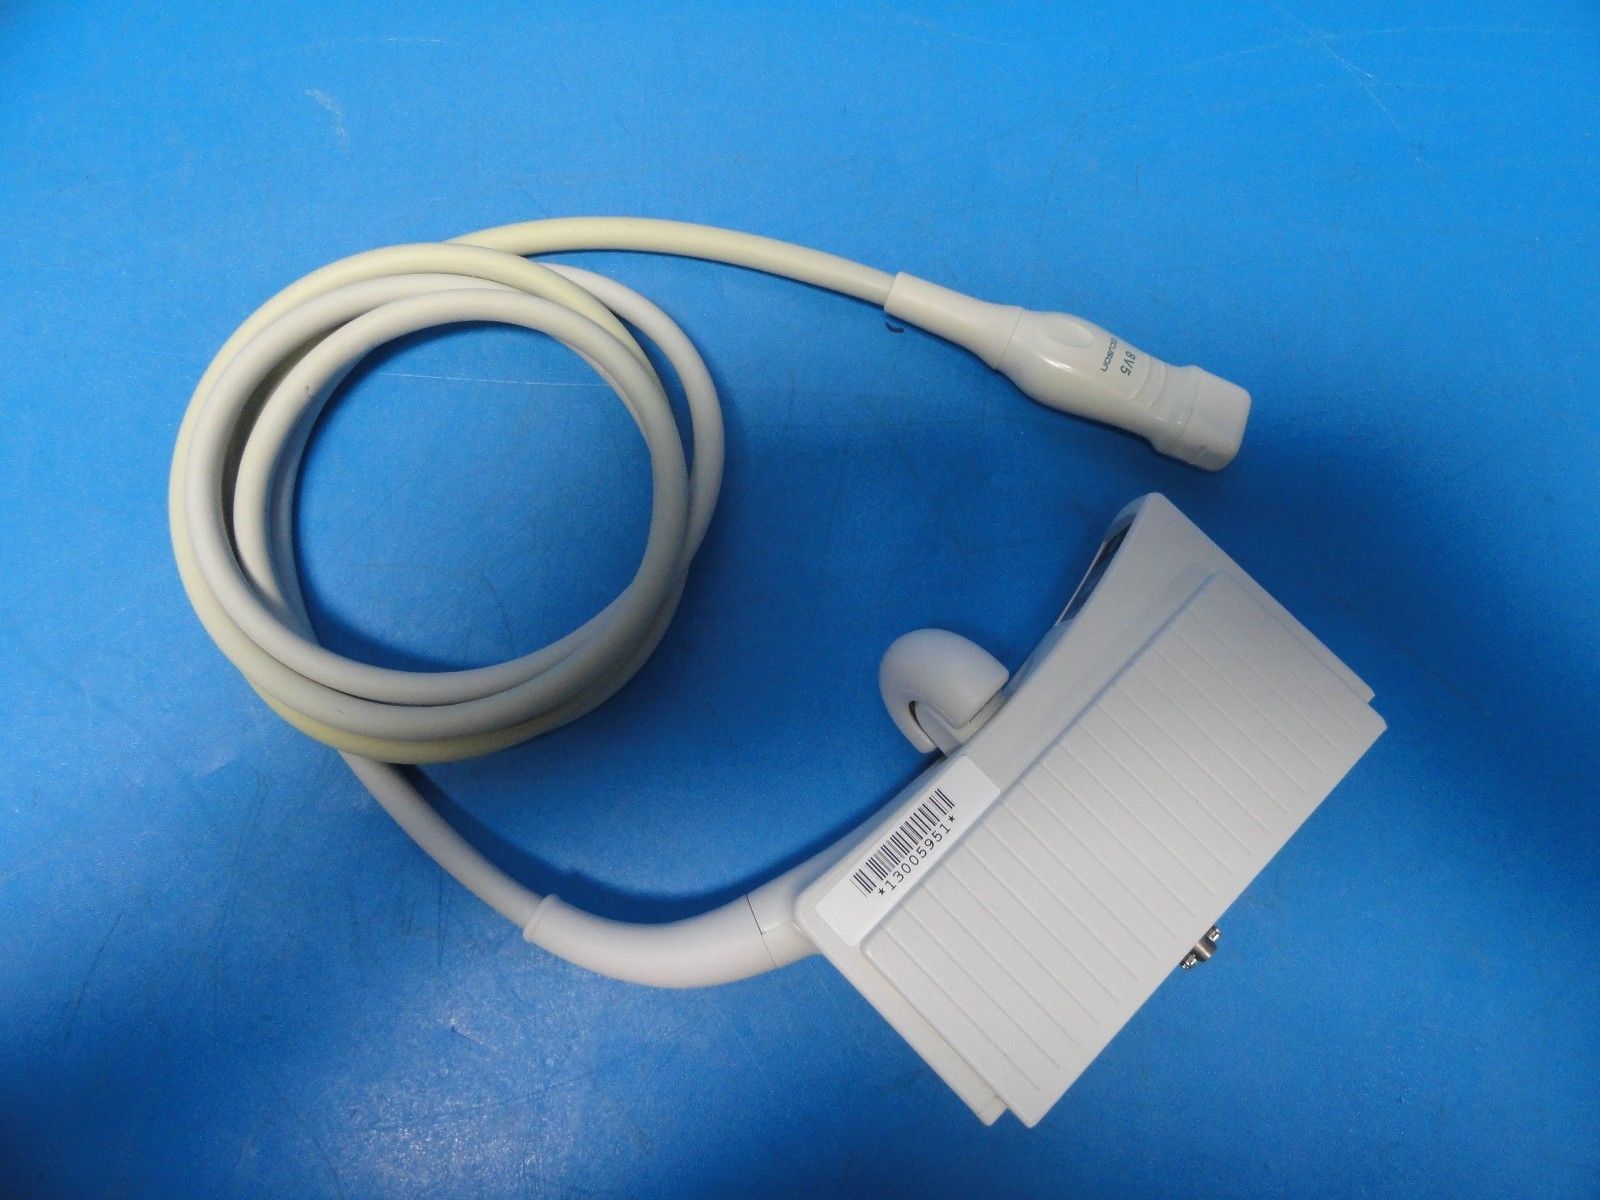 Acuson 8V5 Ultrasound Transducer W/ Pinless Connector for Acuson Sequoia (8624) DIAGNOSTIC ULTRASOUND MACHINES FOR SALE